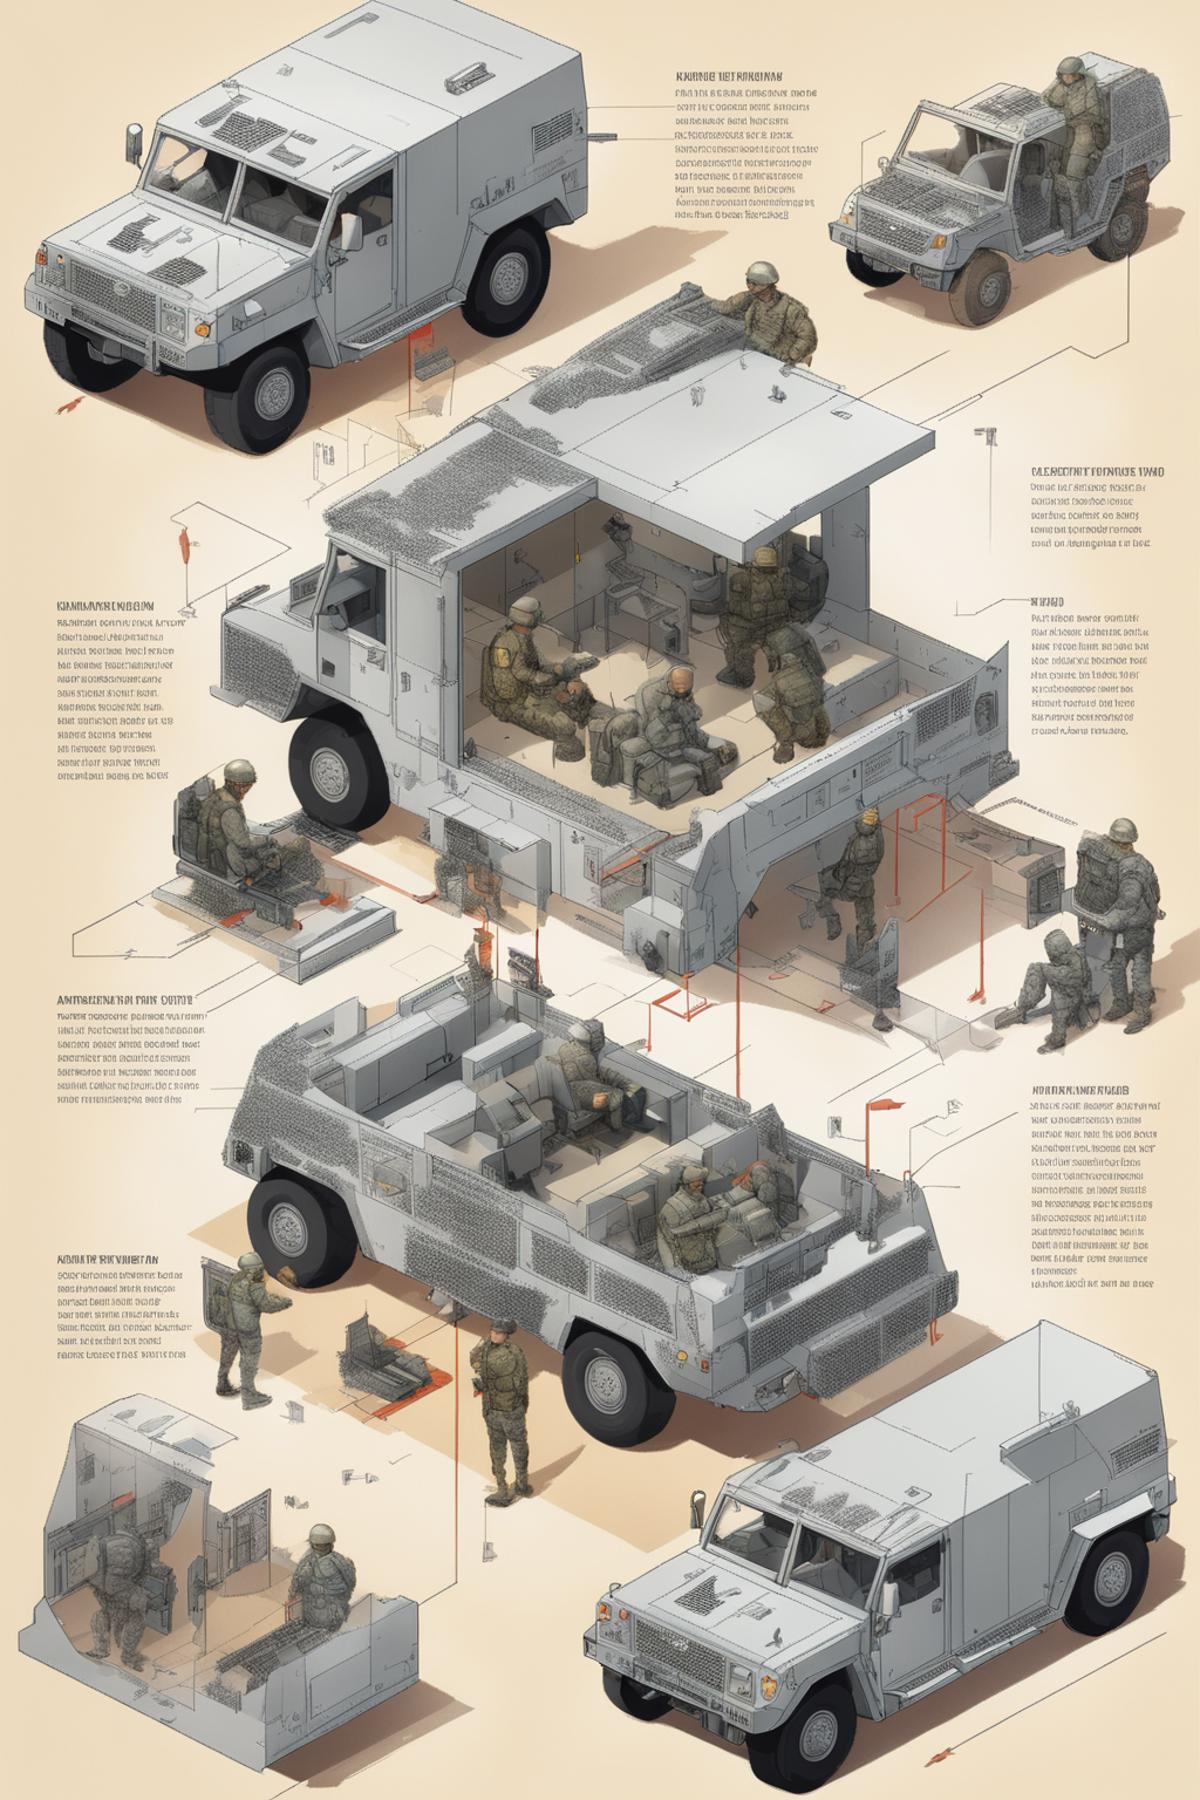 Isometric Cutaway image by tzx592268791466